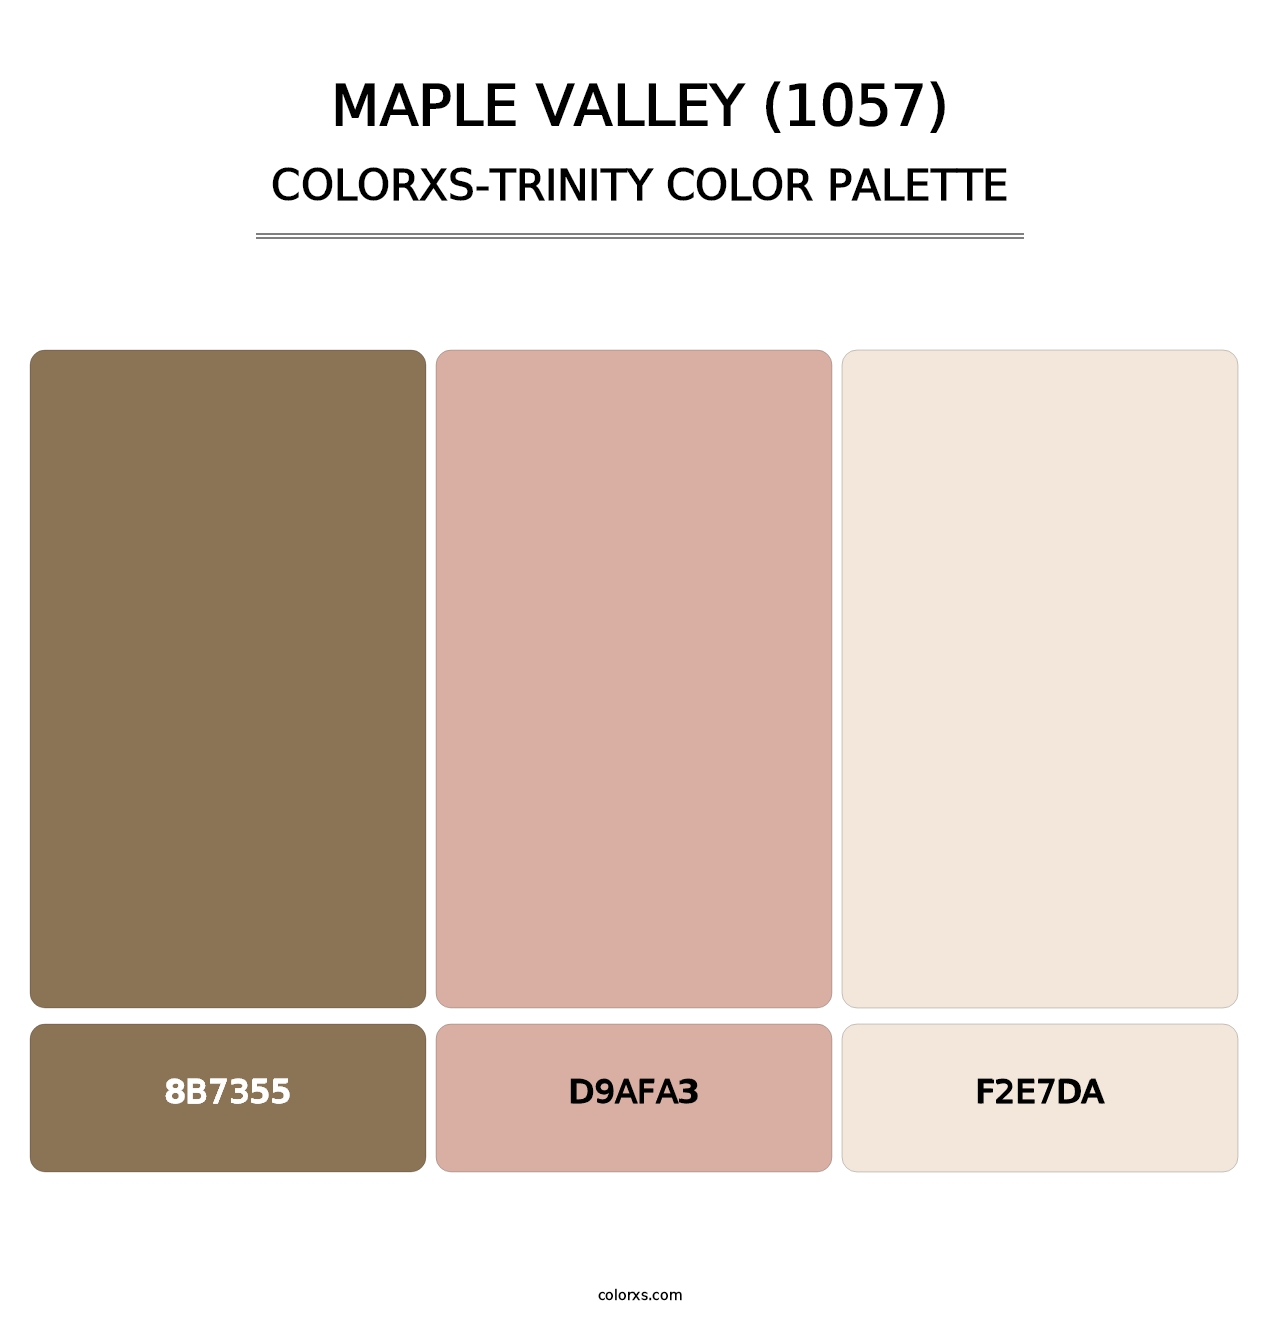 Maple Valley (1057) - Colorxs Trinity Palette